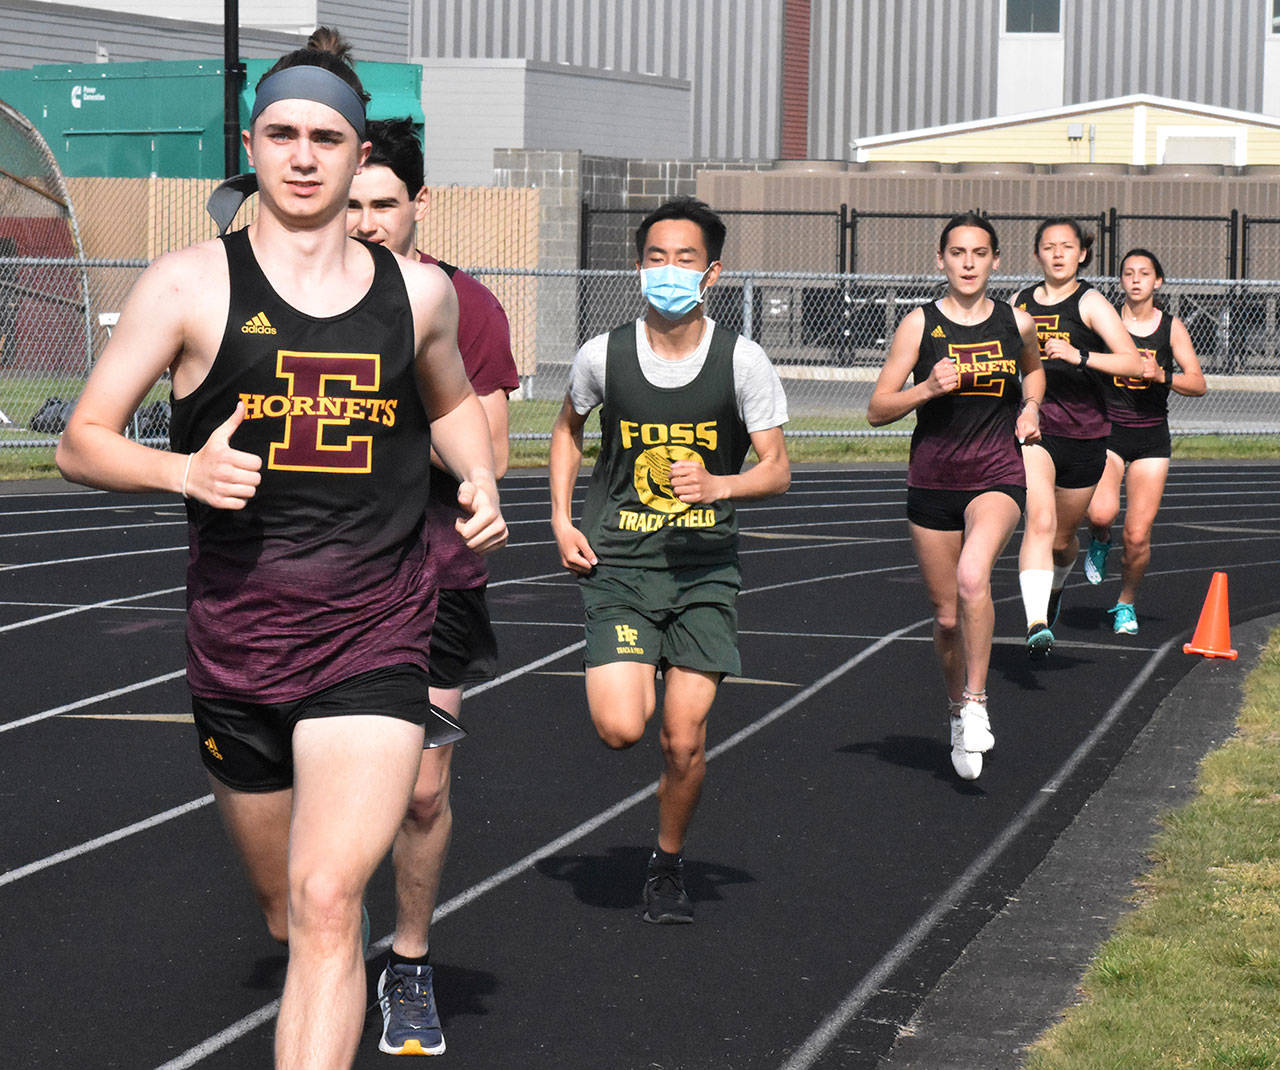 Enumclaw track and field athletes easily ran past Foss High the afternoon of April 28. Because the Falcons brought few competitors to the EHS campus, some of the races had males and females running together. Photo by Kevin Hanson